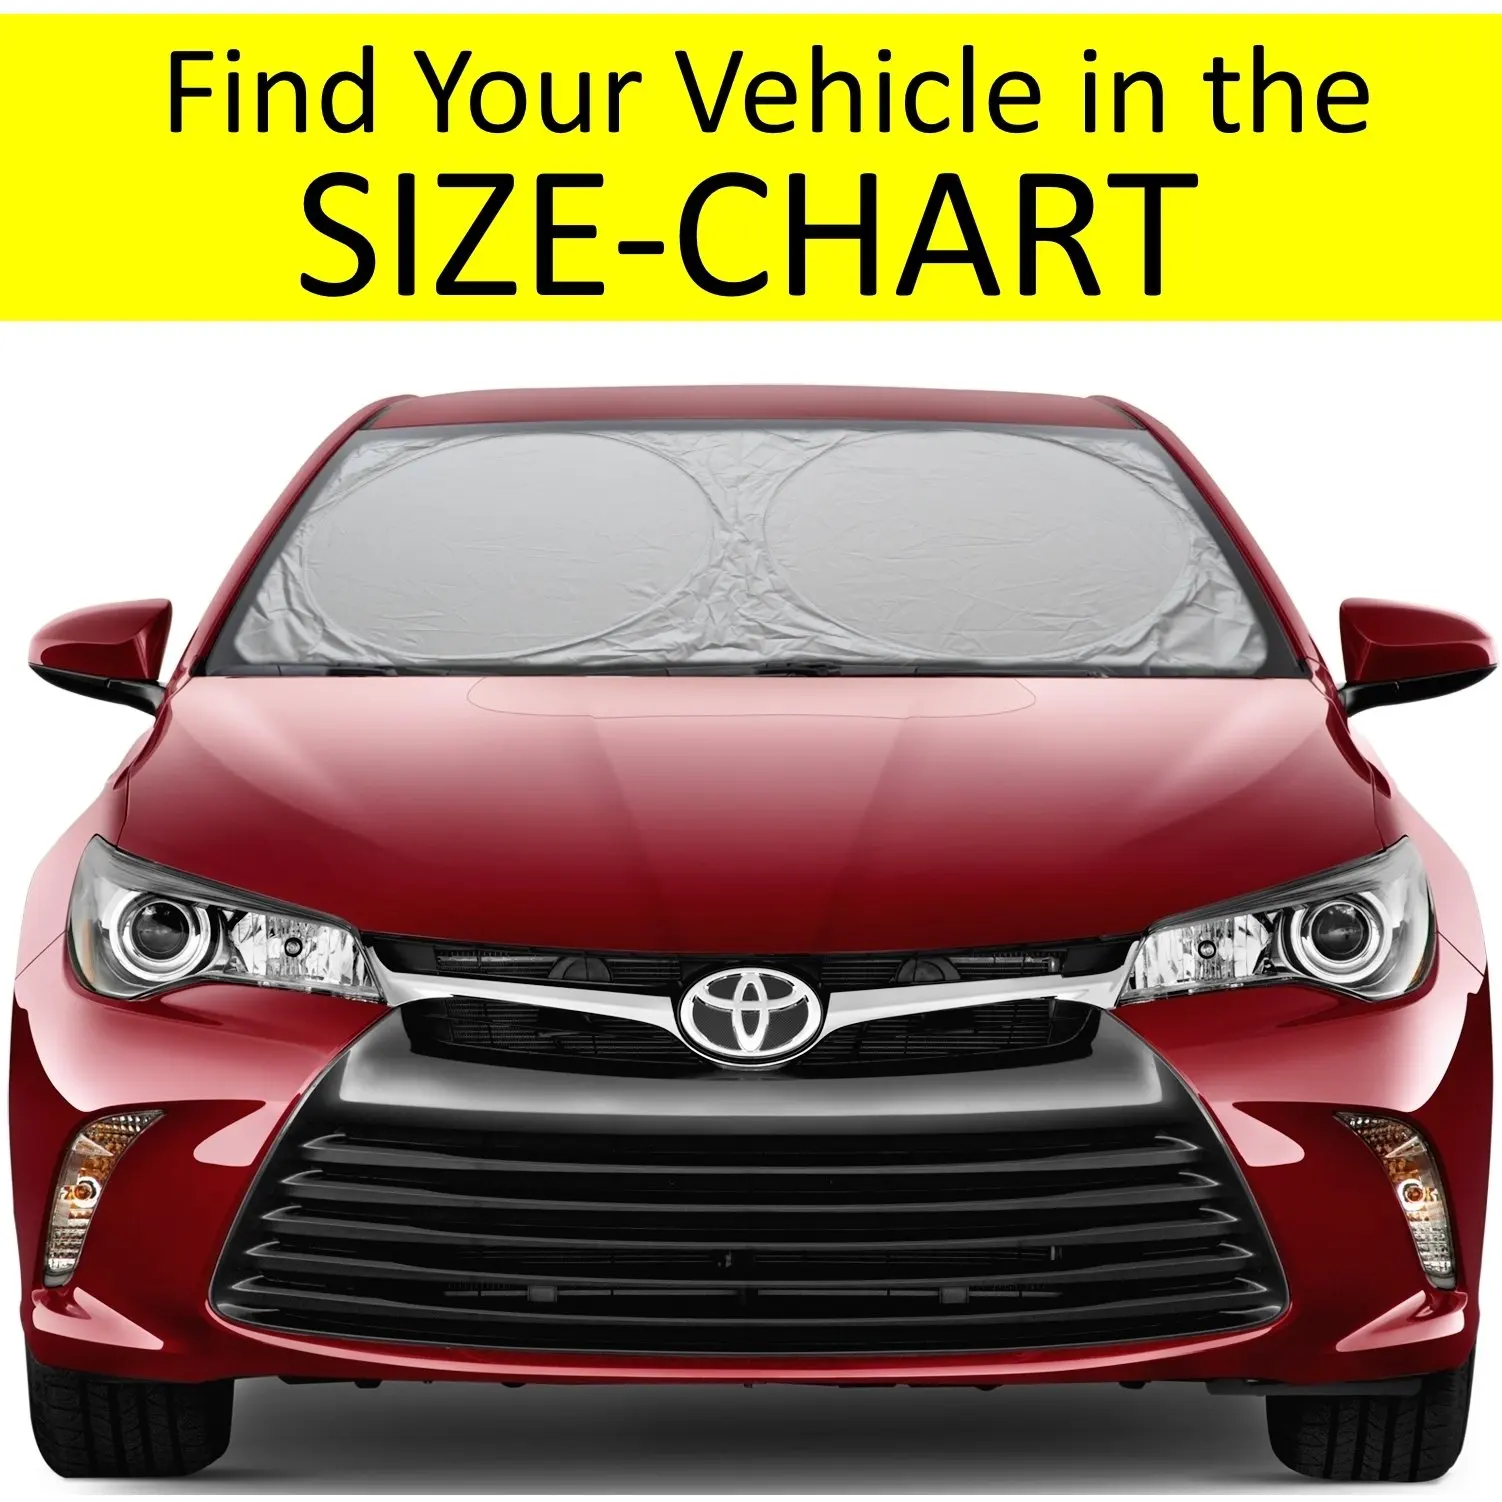 Buy Windshield Sun Shade for Car EasySelect Size Chart with Your